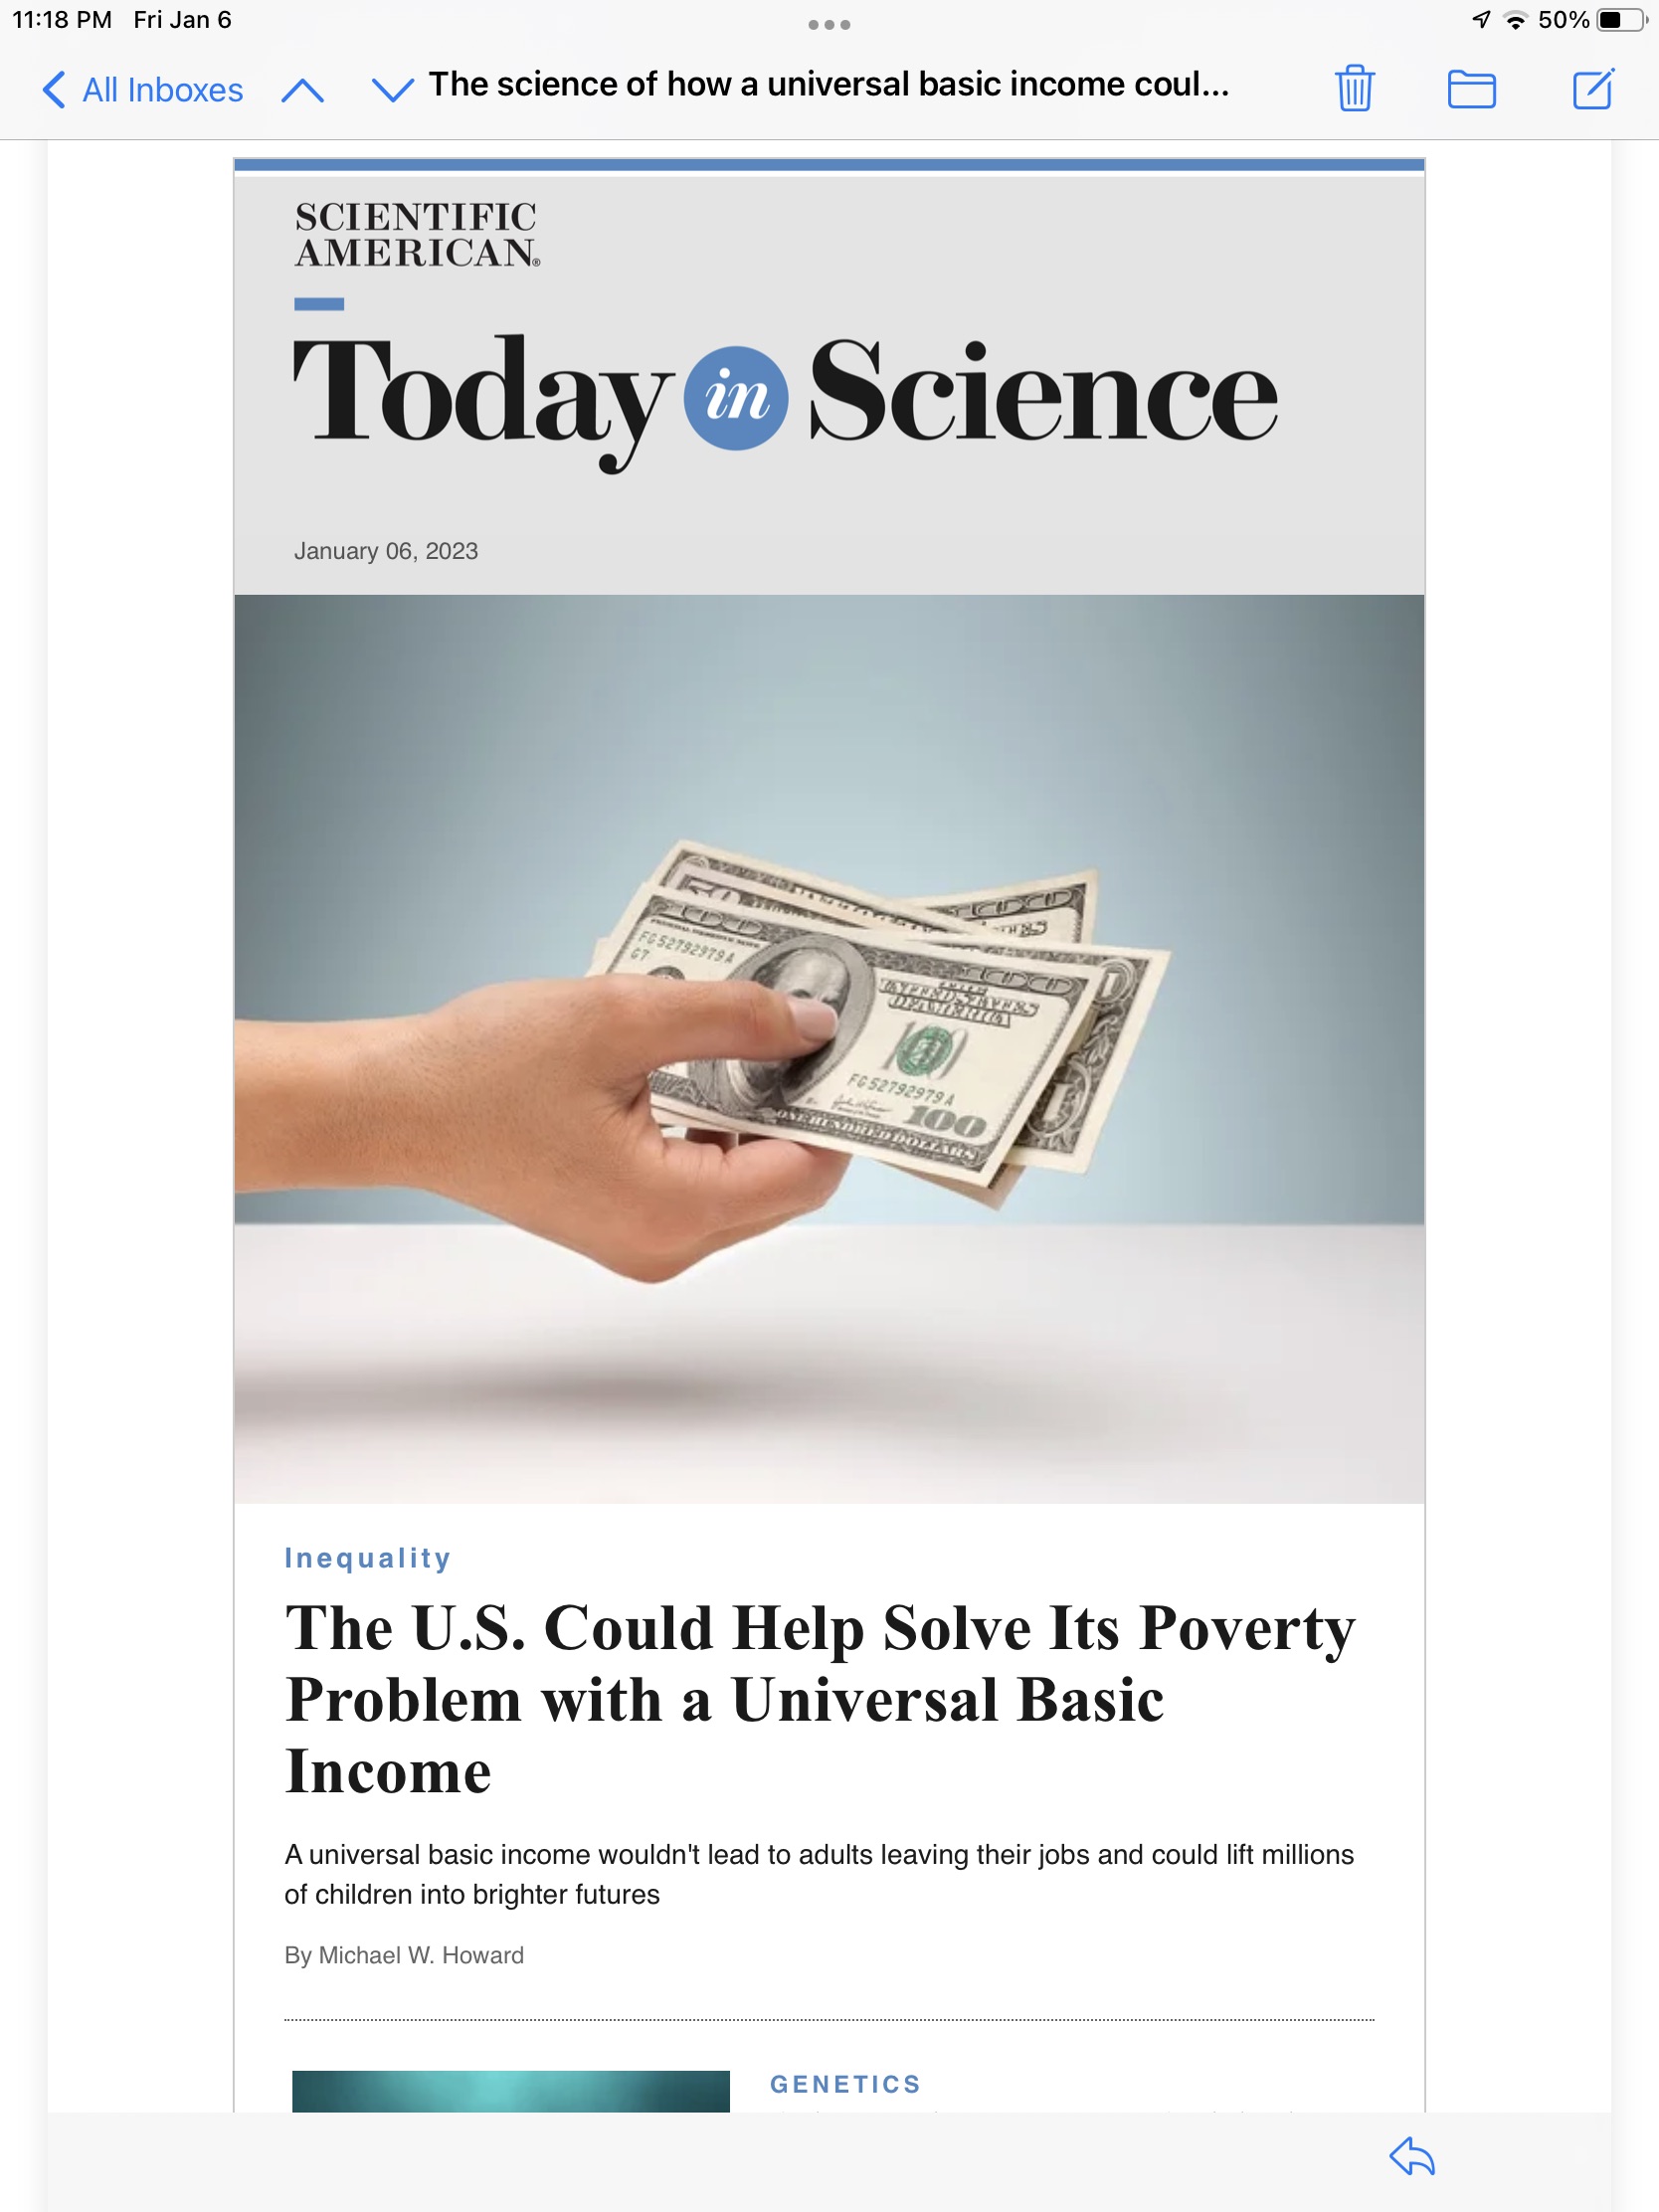 The science of how a universal basic income could end poverty in the U.S.png